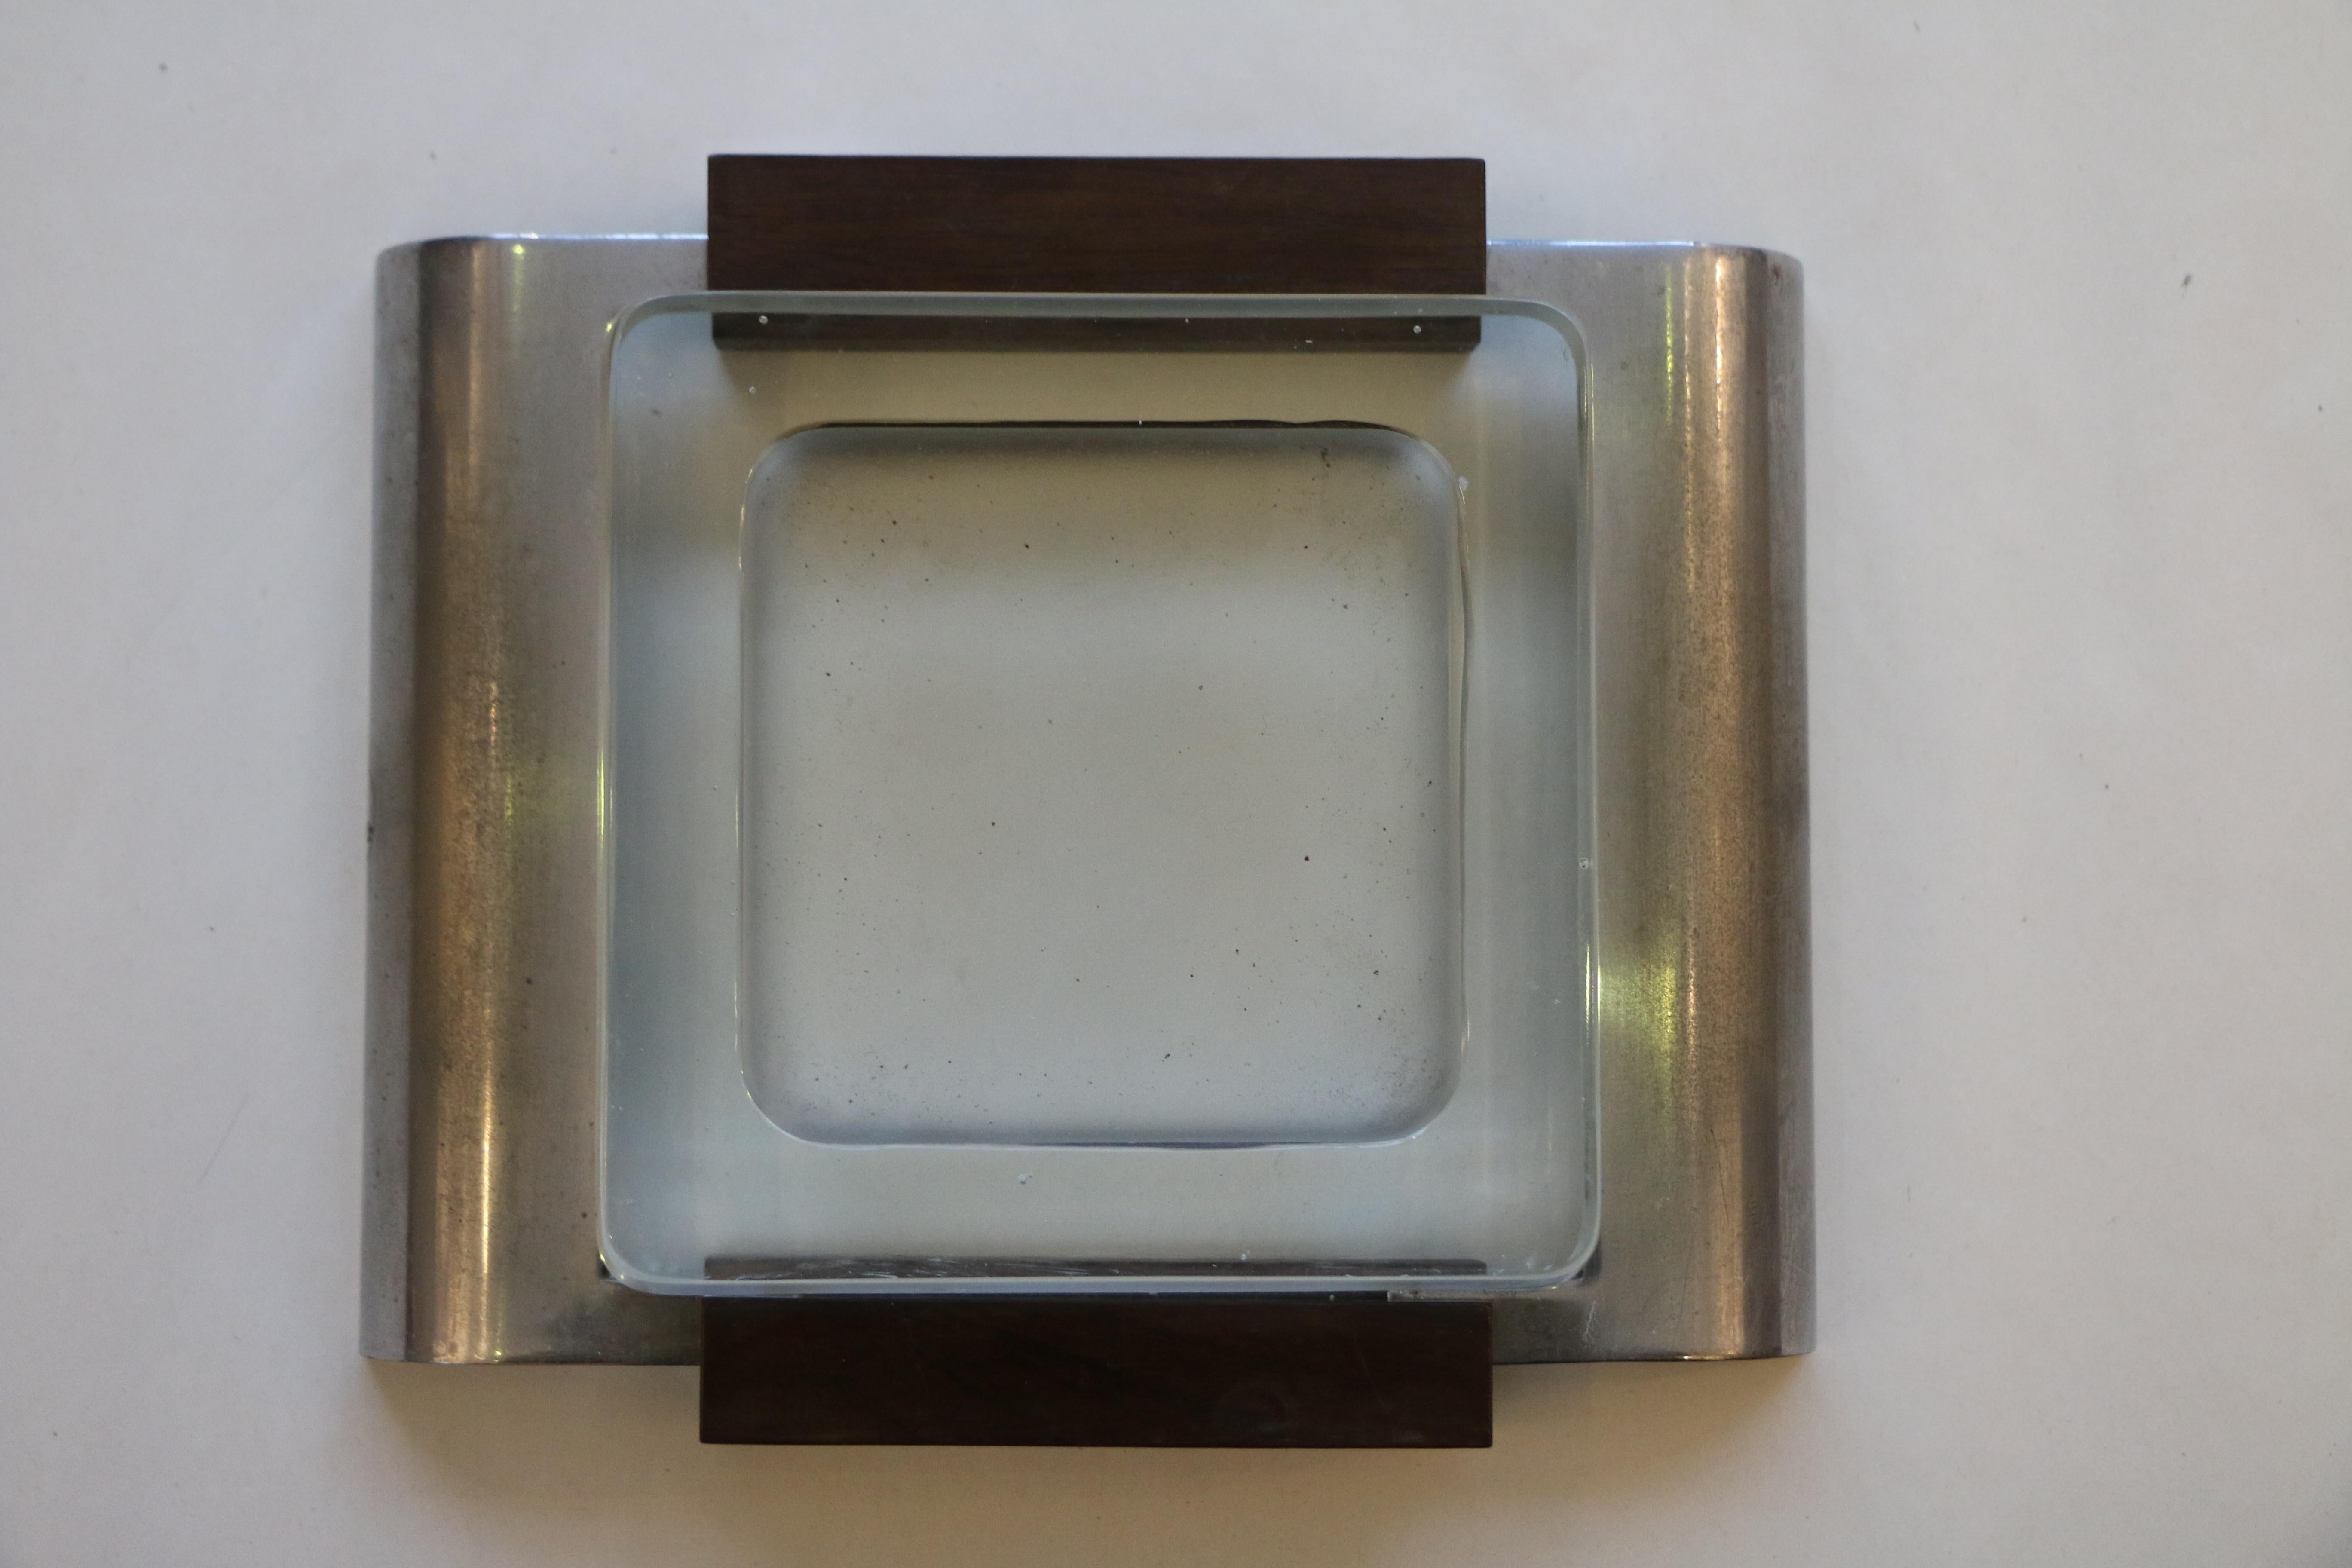 Rare modernist vide-poche (pin tray) or ashtray by Boris Lacroix. It is made of nickel plated metal, thick glass and wood. It is signed with the Boris Lacroix workshop stamp.

Boris Lacroix was a key modernist French designers in the 1930's famous